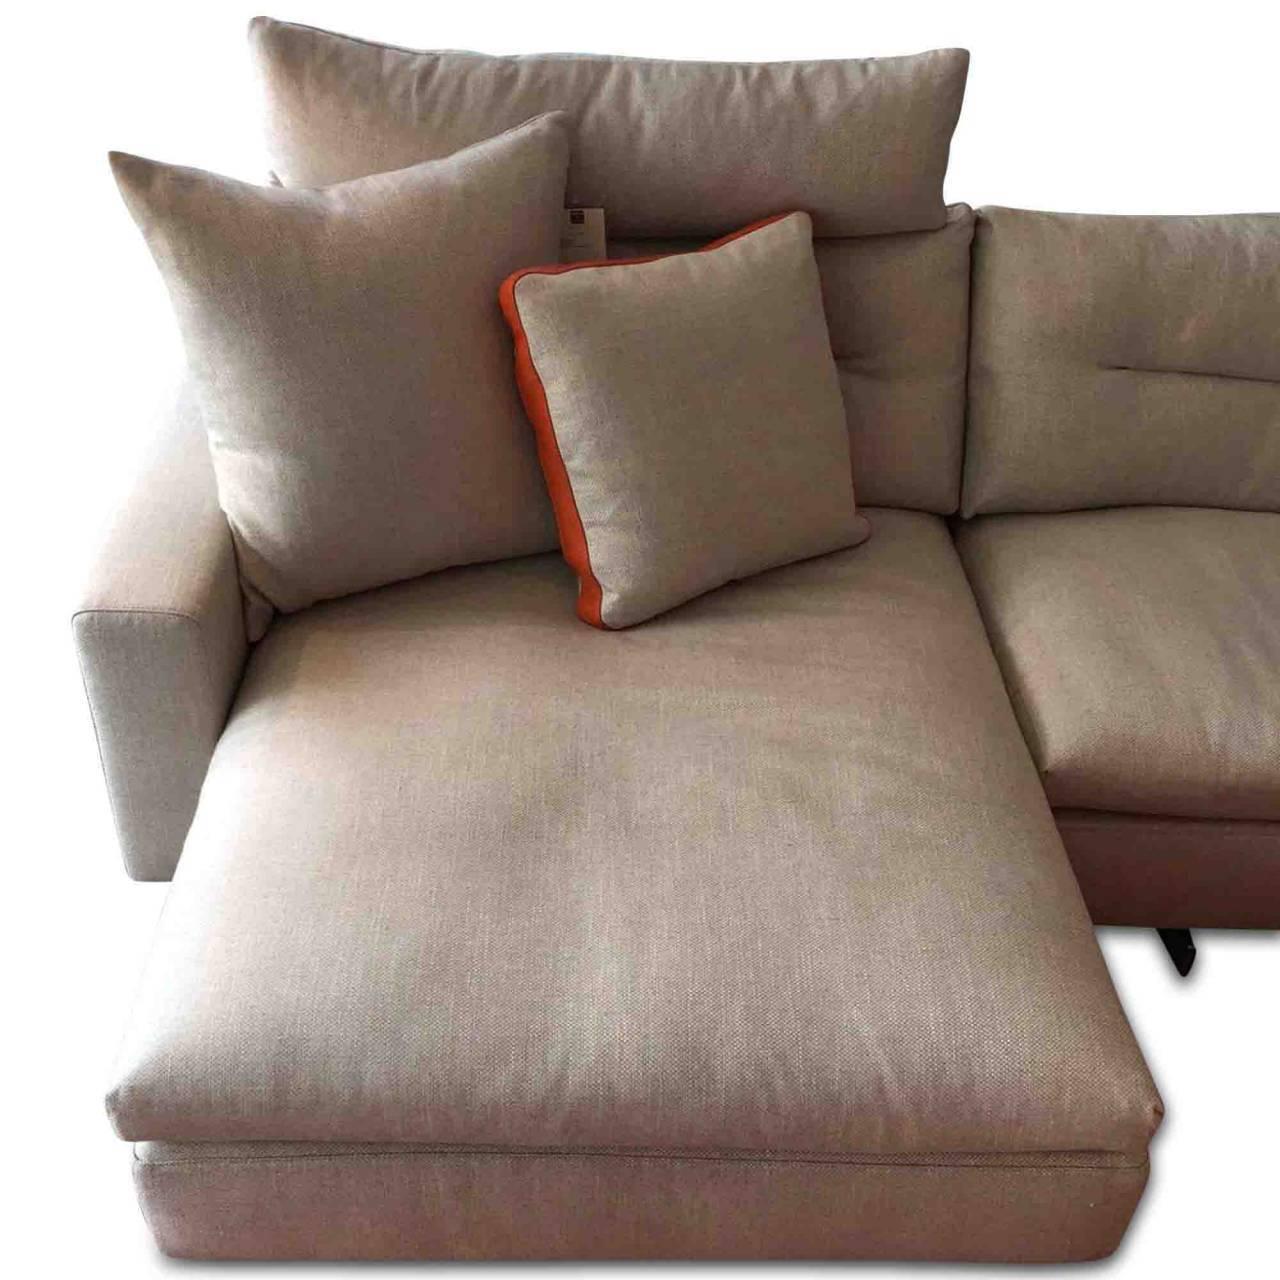 We are delighted to present to you the stunning L-formed sofa 